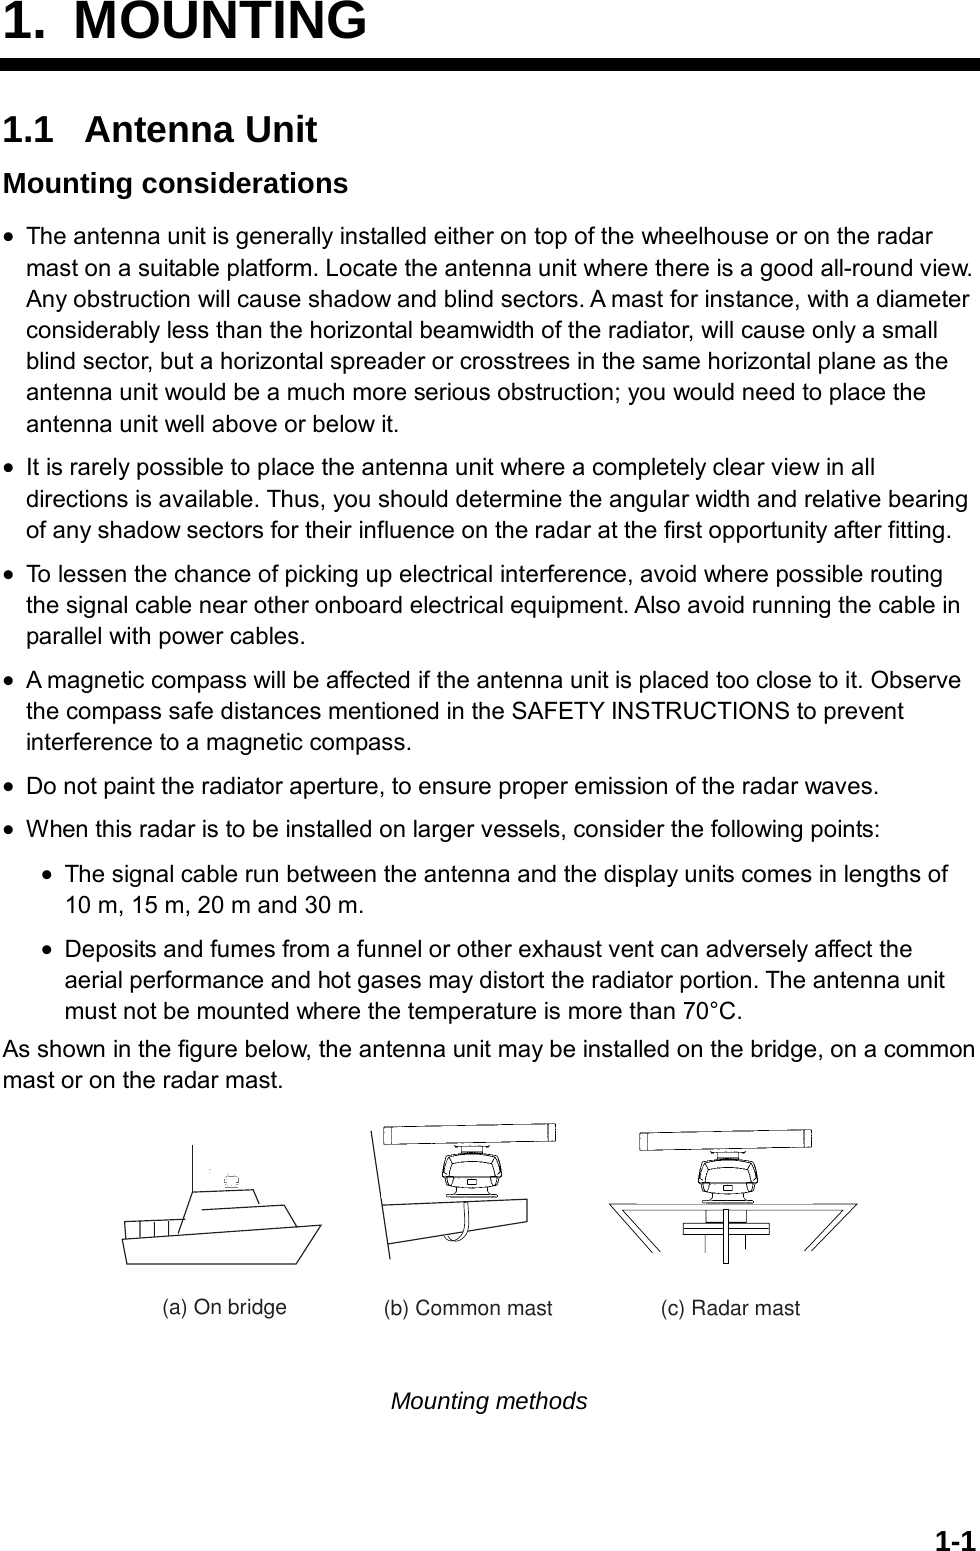   1-11. MOUNTING 1.1 Antenna Unit Mounting considerations •  The antenna unit is generally installed either on top of the wheelhouse or on the radar mast on a suitable platform. Locate the antenna unit where there is a good all-round view. Any obstruction will cause shadow and blind sectors. A mast for instance, with a diameter considerably less than the horizontal beamwidth of the radiator, will cause only a small blind sector, but a horizontal spreader or crosstrees in the same horizontal plane as the antenna unit would be a much more serious obstruction; you would need to place the antenna unit well above or below it. •  It is rarely possible to place the antenna unit where a completely clear view in all directions is available. Thus, you should determine the angular width and relative bearing of any shadow sectors for their influence on the radar at the first opportunity after fitting. •  To lessen the chance of picking up electrical interference, avoid where possible routing the signal cable near other onboard electrical equipment. Also avoid running the cable in parallel with power cables. •  A magnetic compass will be affected if the antenna unit is placed too close to it. Observe the compass safe distances mentioned in the SAFETY INSTRUCTIONS to prevent interference to a magnetic compass. •  Do not paint the radiator aperture, to ensure proper emission of the radar waves. •  When this radar is to be installed on larger vessels, consider the following points: •  The signal cable run between the antenna and the display units comes in lengths of 10 m, 15 m, 20 m and 30 m. •  Deposits and fumes from a funnel or other exhaust vent can adversely affect the aerial performance and hot gases may distort the radiator portion. The antenna unit must not be mounted where the temperature is more than 70°C. As shown in the figure below, the antenna unit may be installed on the bridge, on a common mast or on the radar mast. (a) On bridge (b) Common mast (c) Radar mast Mounting methods